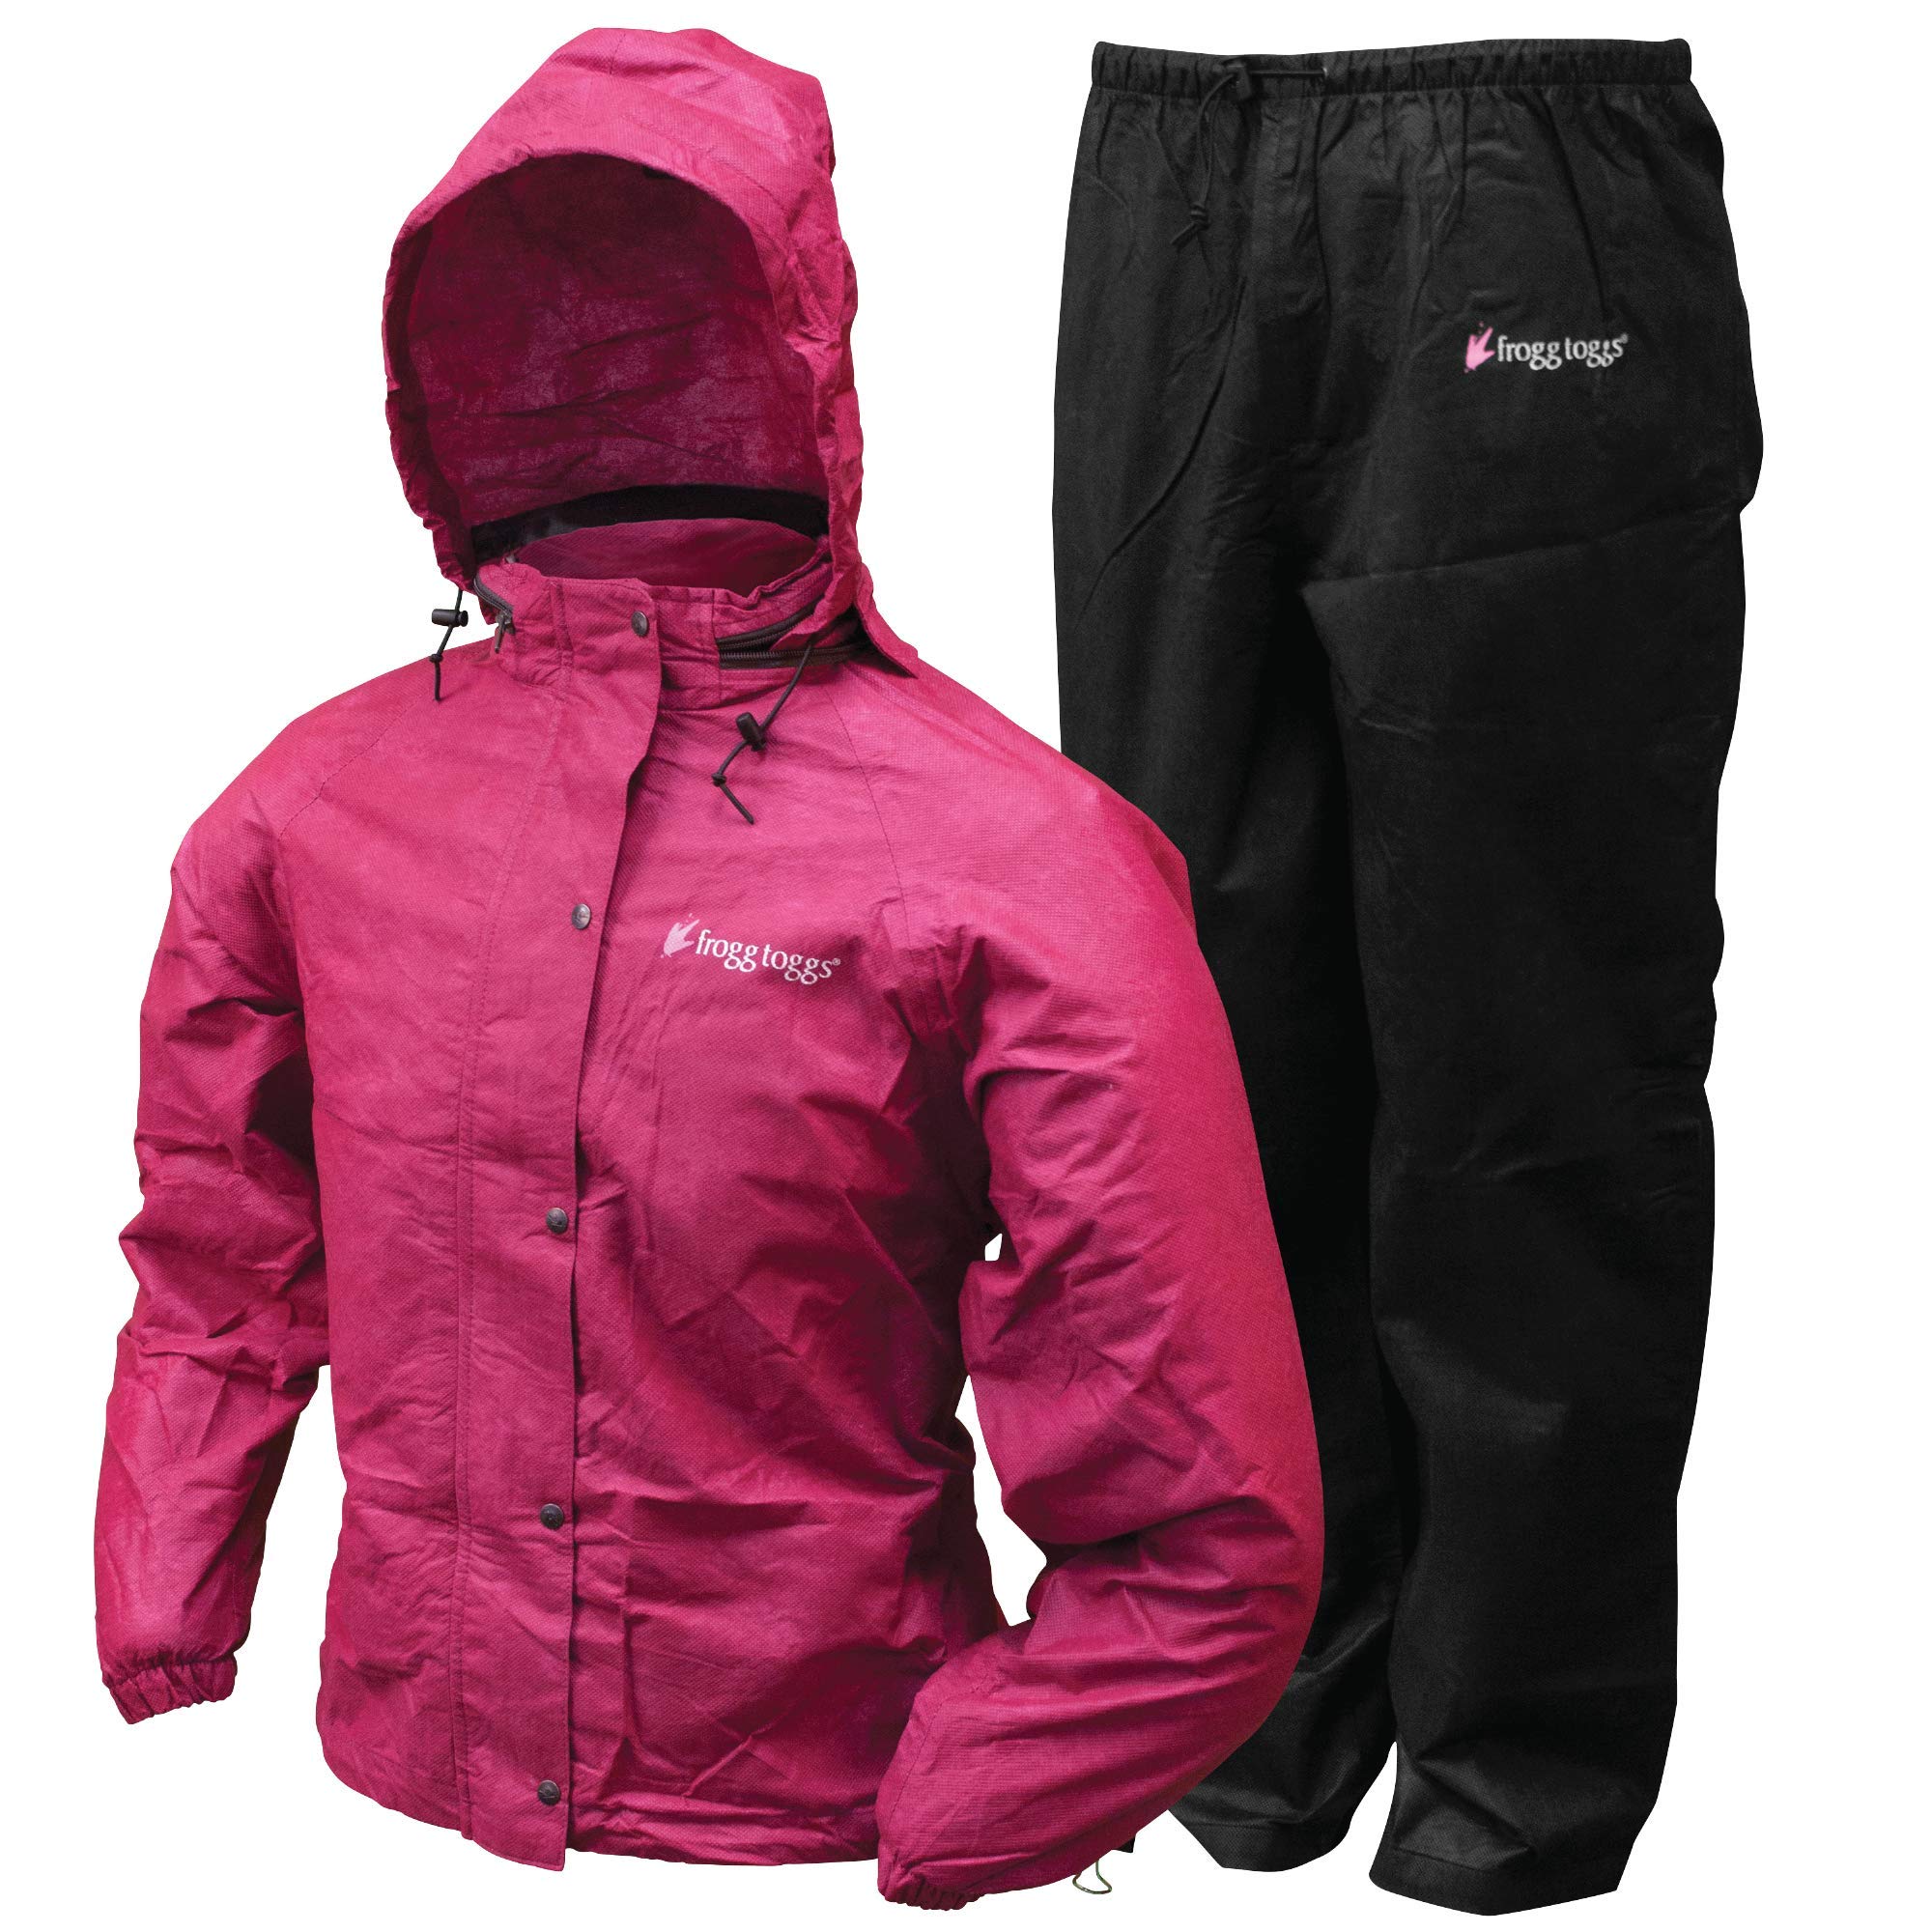 FROGG TOGGS Women's Classic All-Purpose Waterproof Breathable Rain Suit